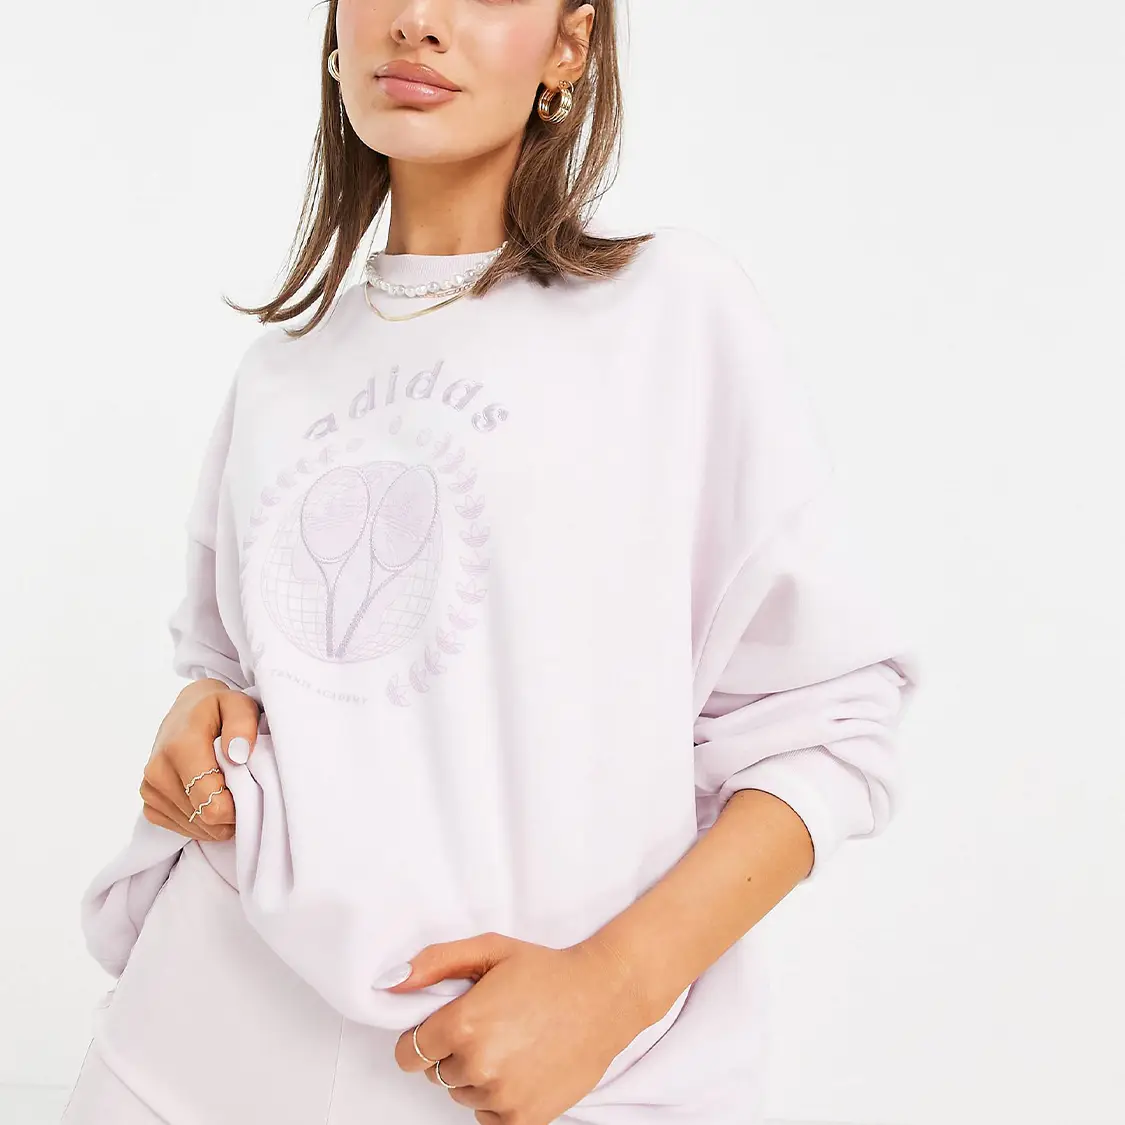 Graphic Sweatshirts And Tees You'll Add Straight To Your Basket | The ...